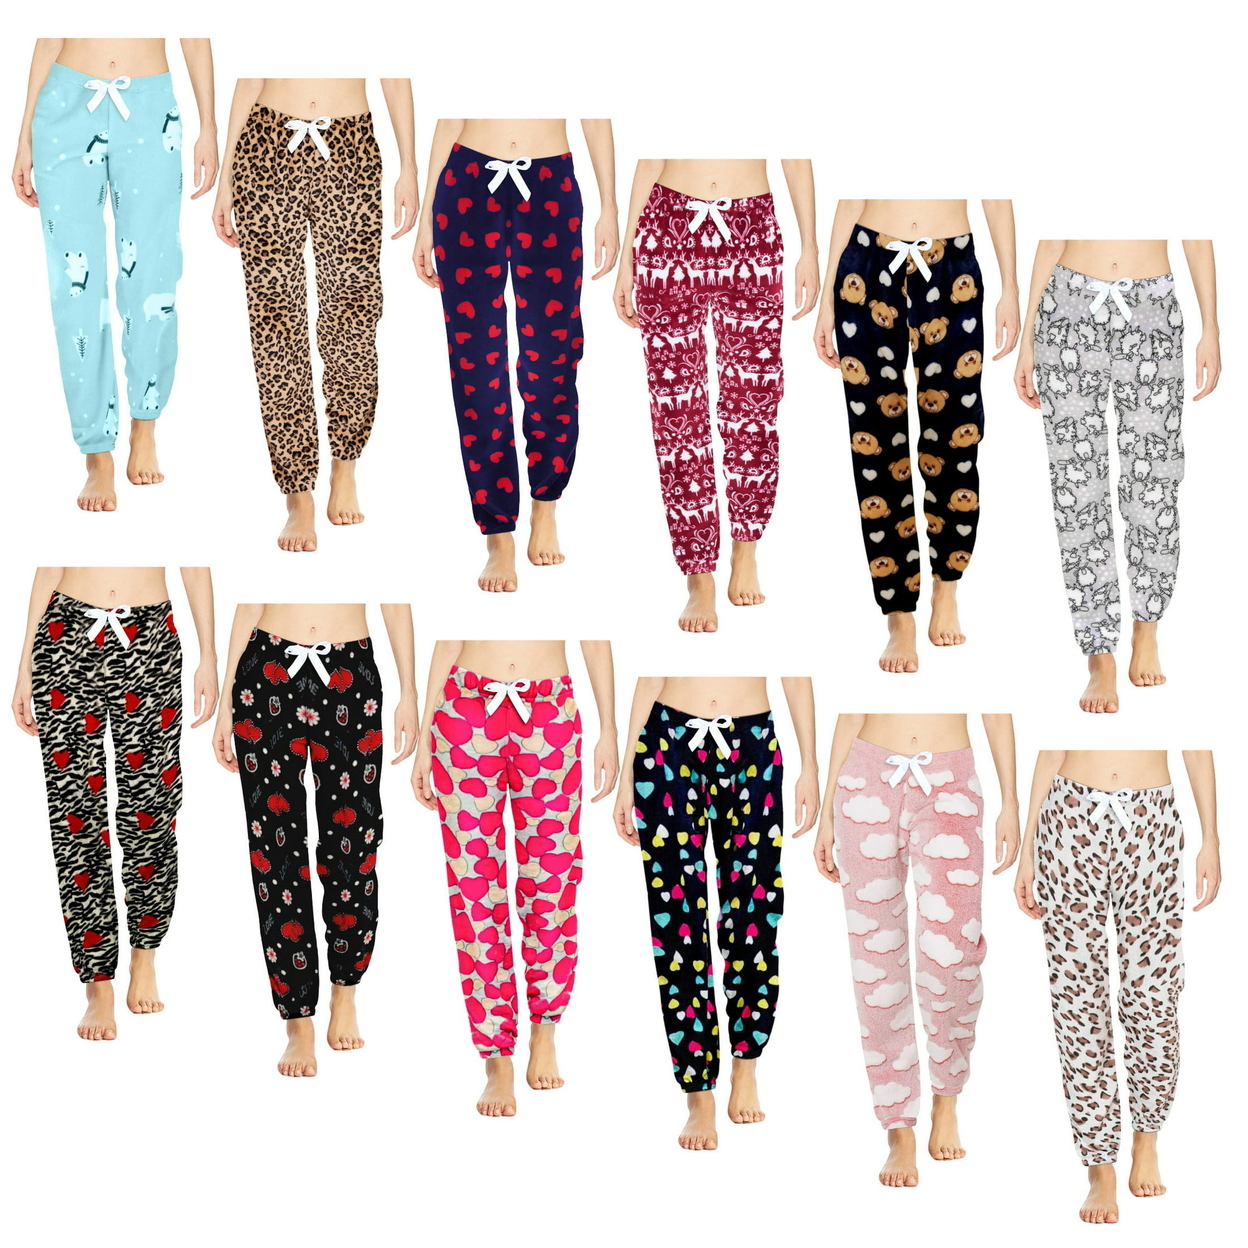 4-Pack: Women's Printed Ultra-Soft Comfy Stretch Micro-Fleece Pajama Lounge Pants - X-large, Shapes